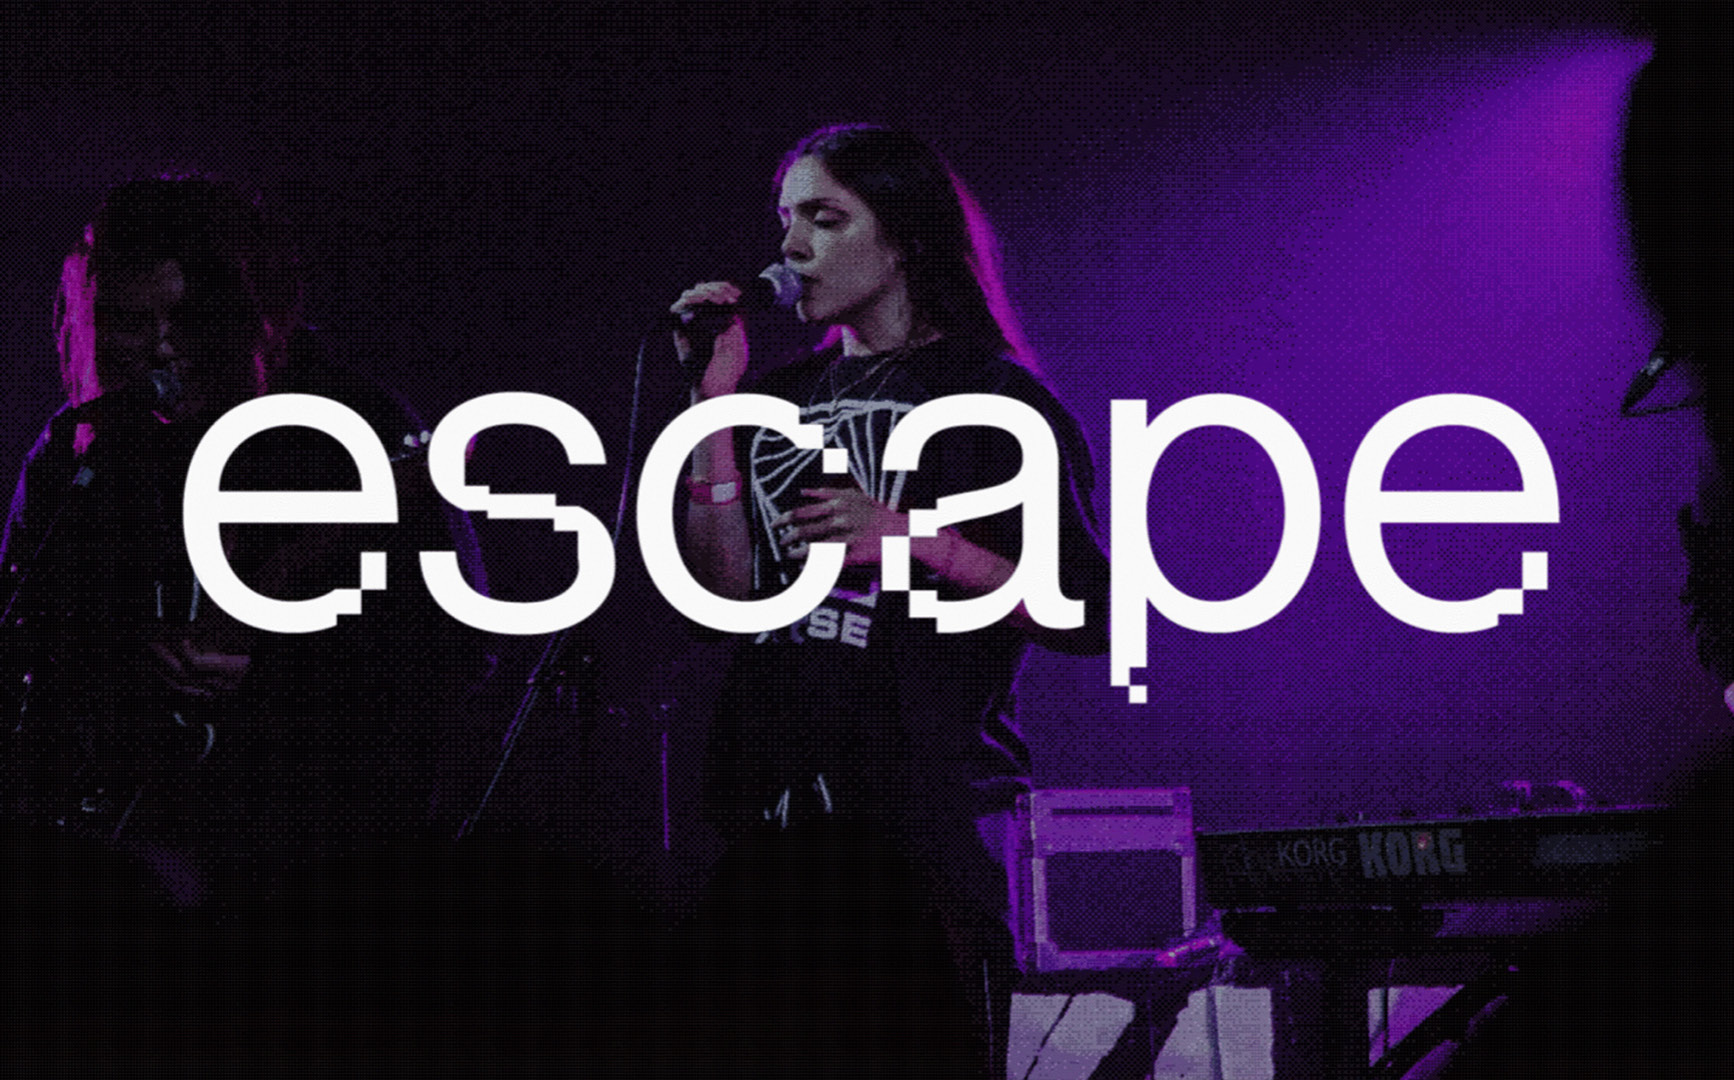 A woman holding a microphone performs in a dark music venue with moody purple lighting. The word Escape is overlaid on the photograph.